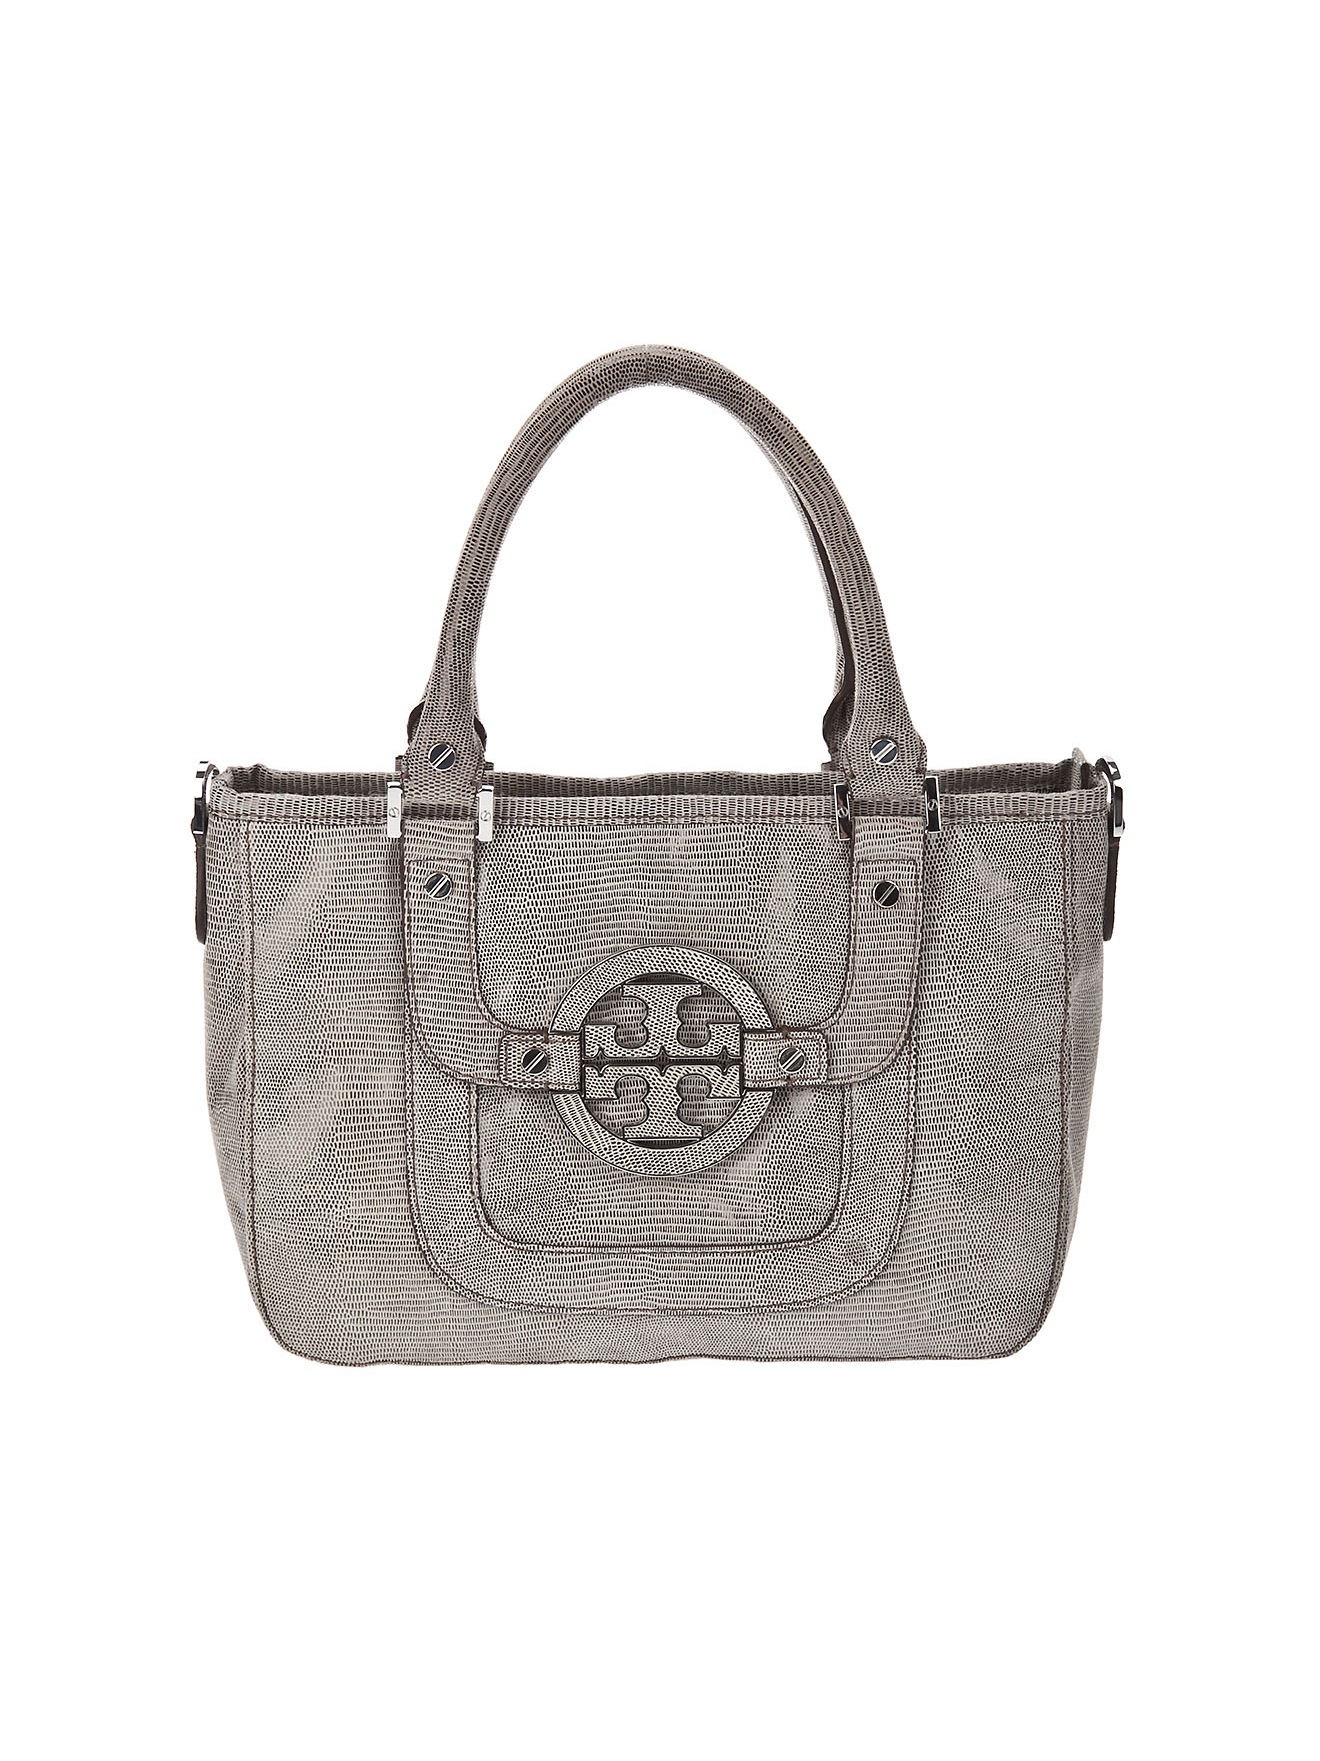 Tory Burch Leather Shoulder Bag in Gray (grey) | Lyst